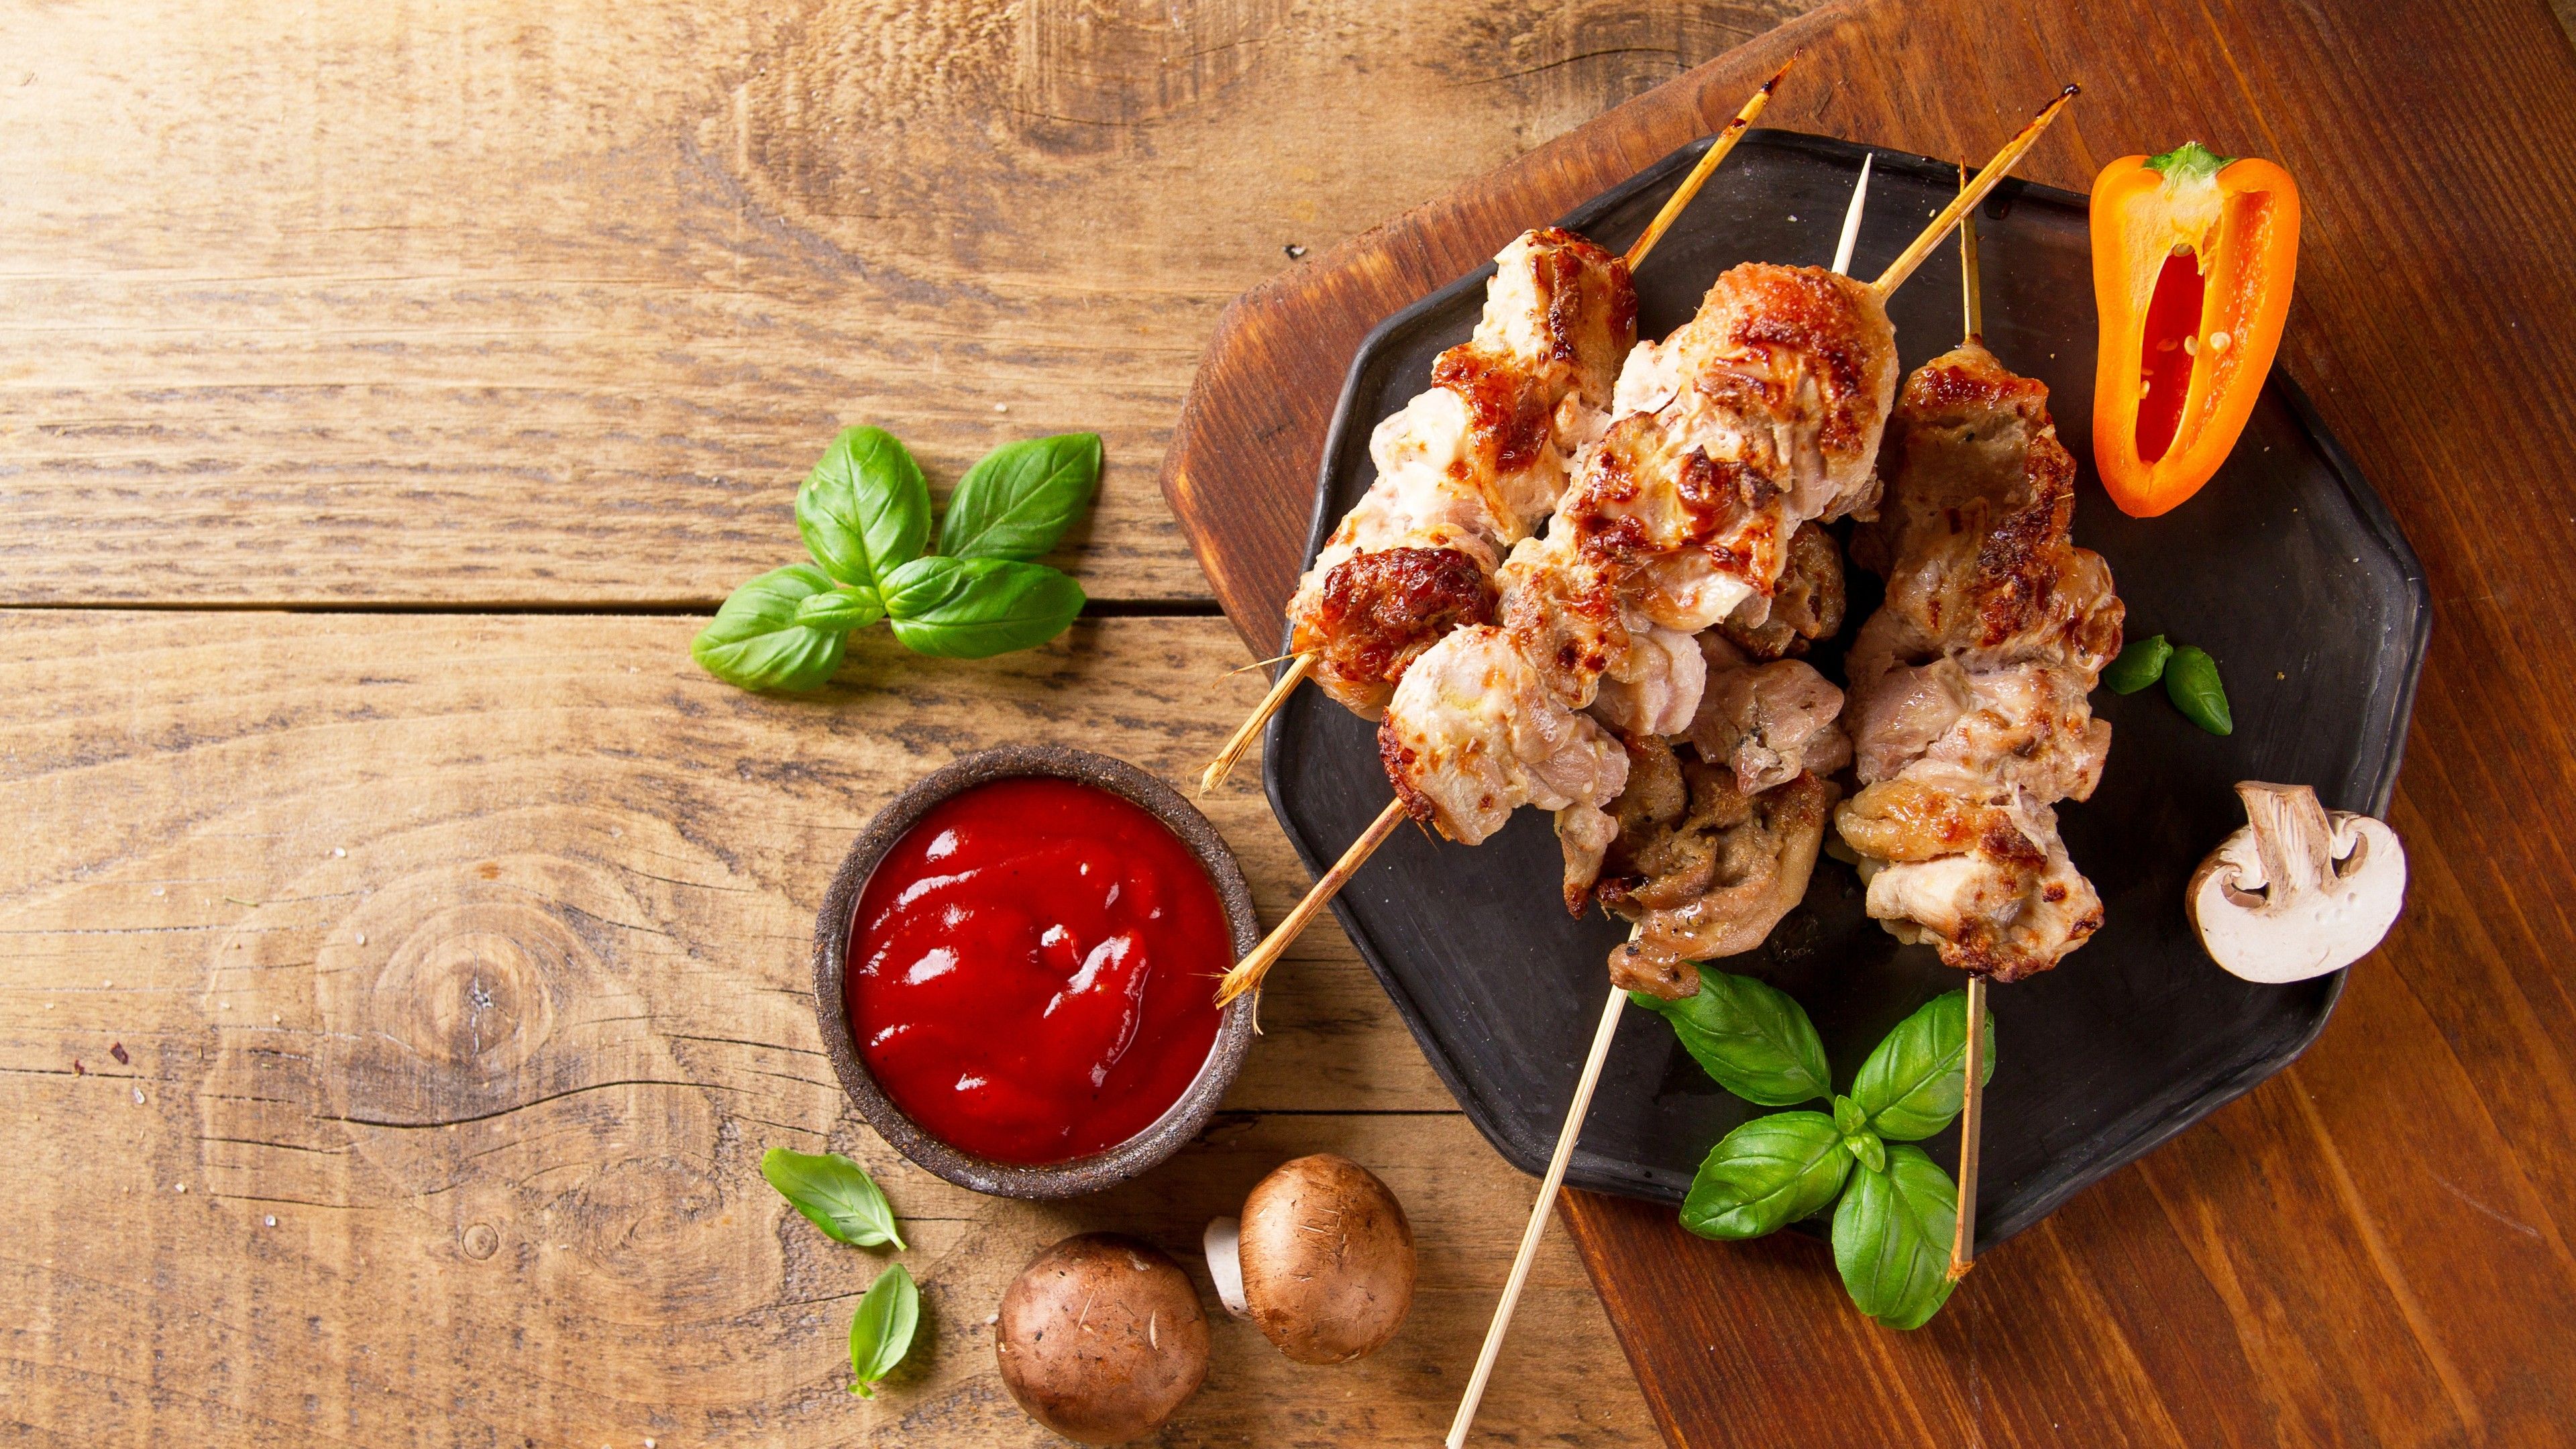 Download 3840x2160 Meat, Barbecue, Ketchup, Vegetables, Kebab, Yummy